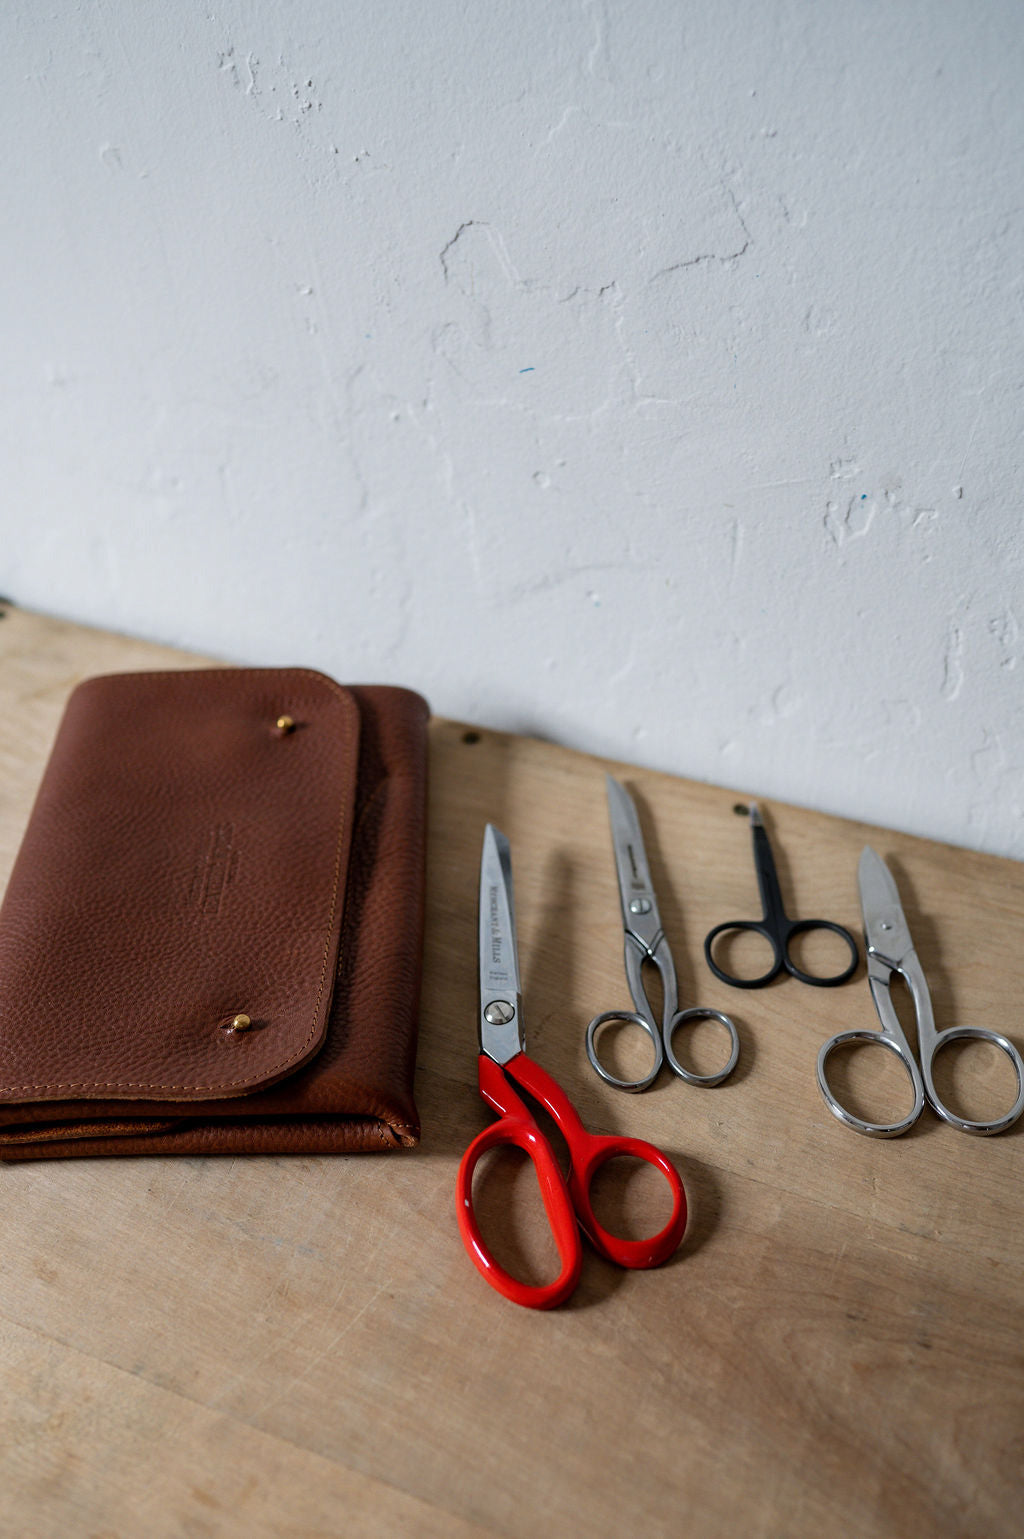 Merchant and Mills Leather Needle Wallet | Boston General Store